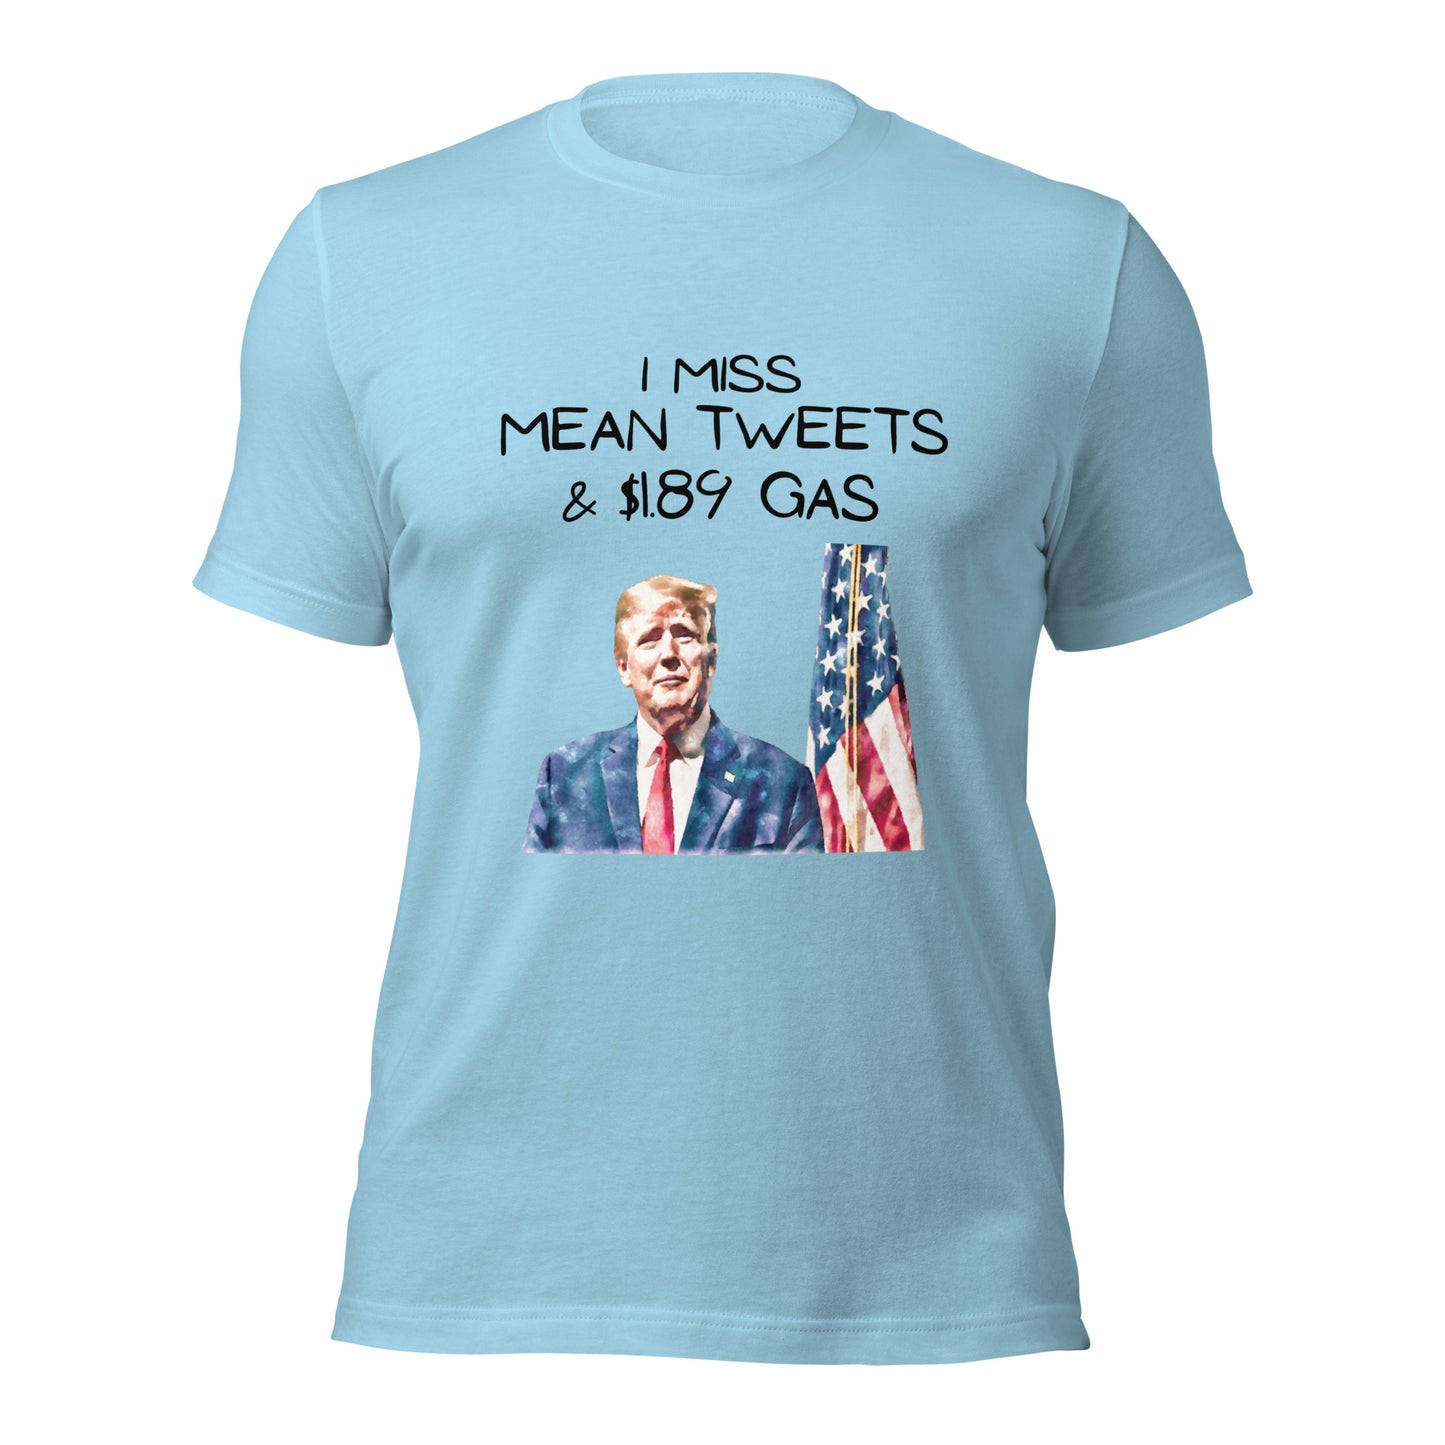 "I Miss Mean Tweets & $1.89 Gas" T-Shirt - Weave Got Gifts - Unique Gifts You Won’t Find Anywhere Else!